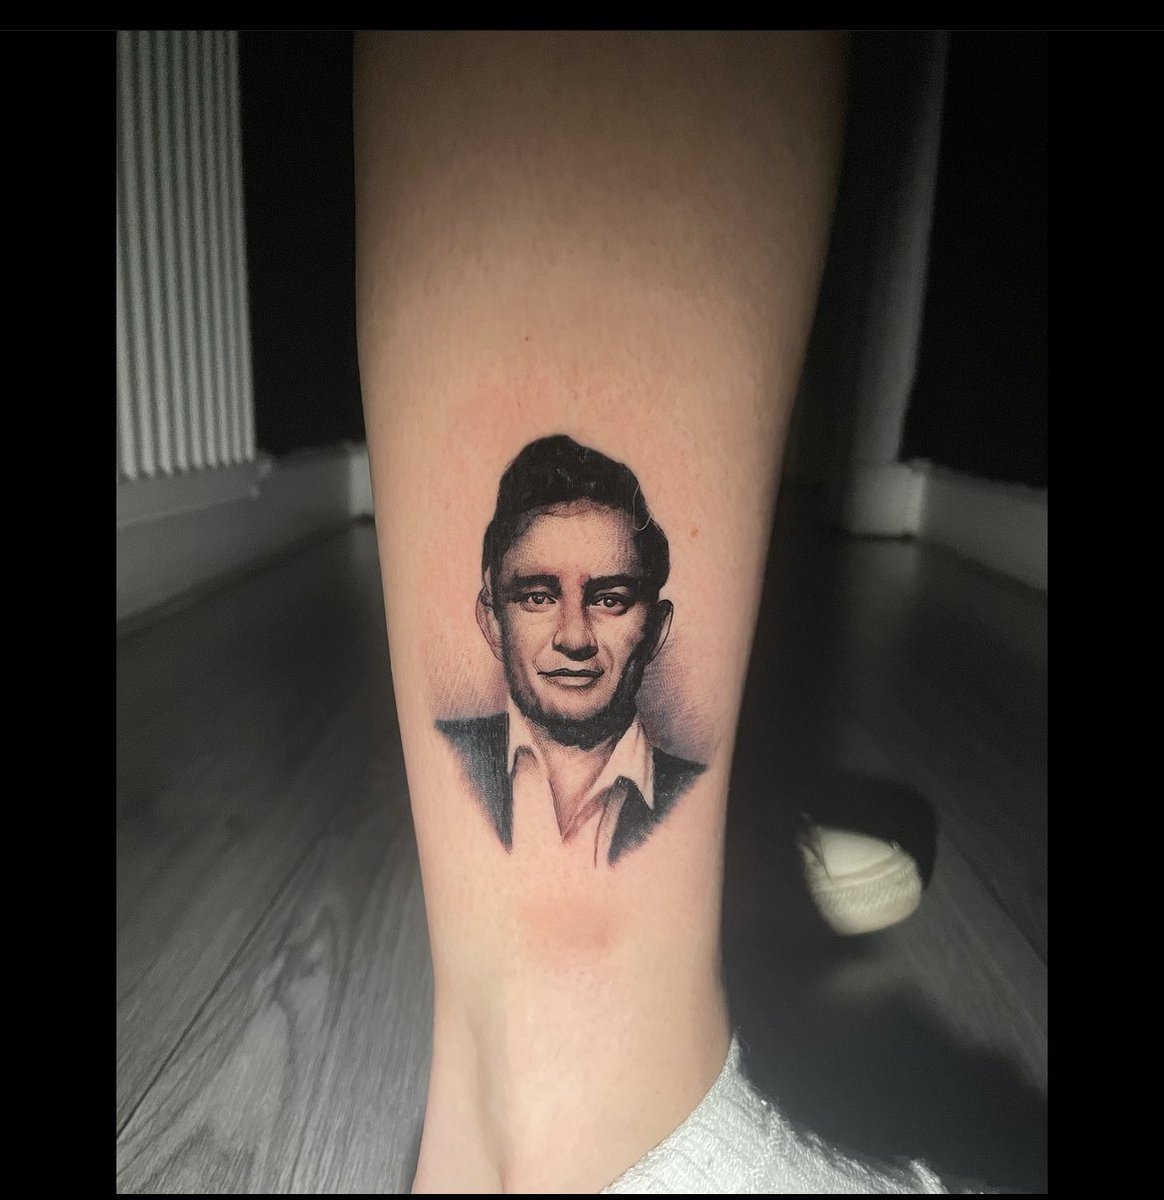 Done this mini portrait of #johnnycash today 😎

Someone get a portrait of Andrew Tate

#tattoo #portrait #ink #glasgowtattoo